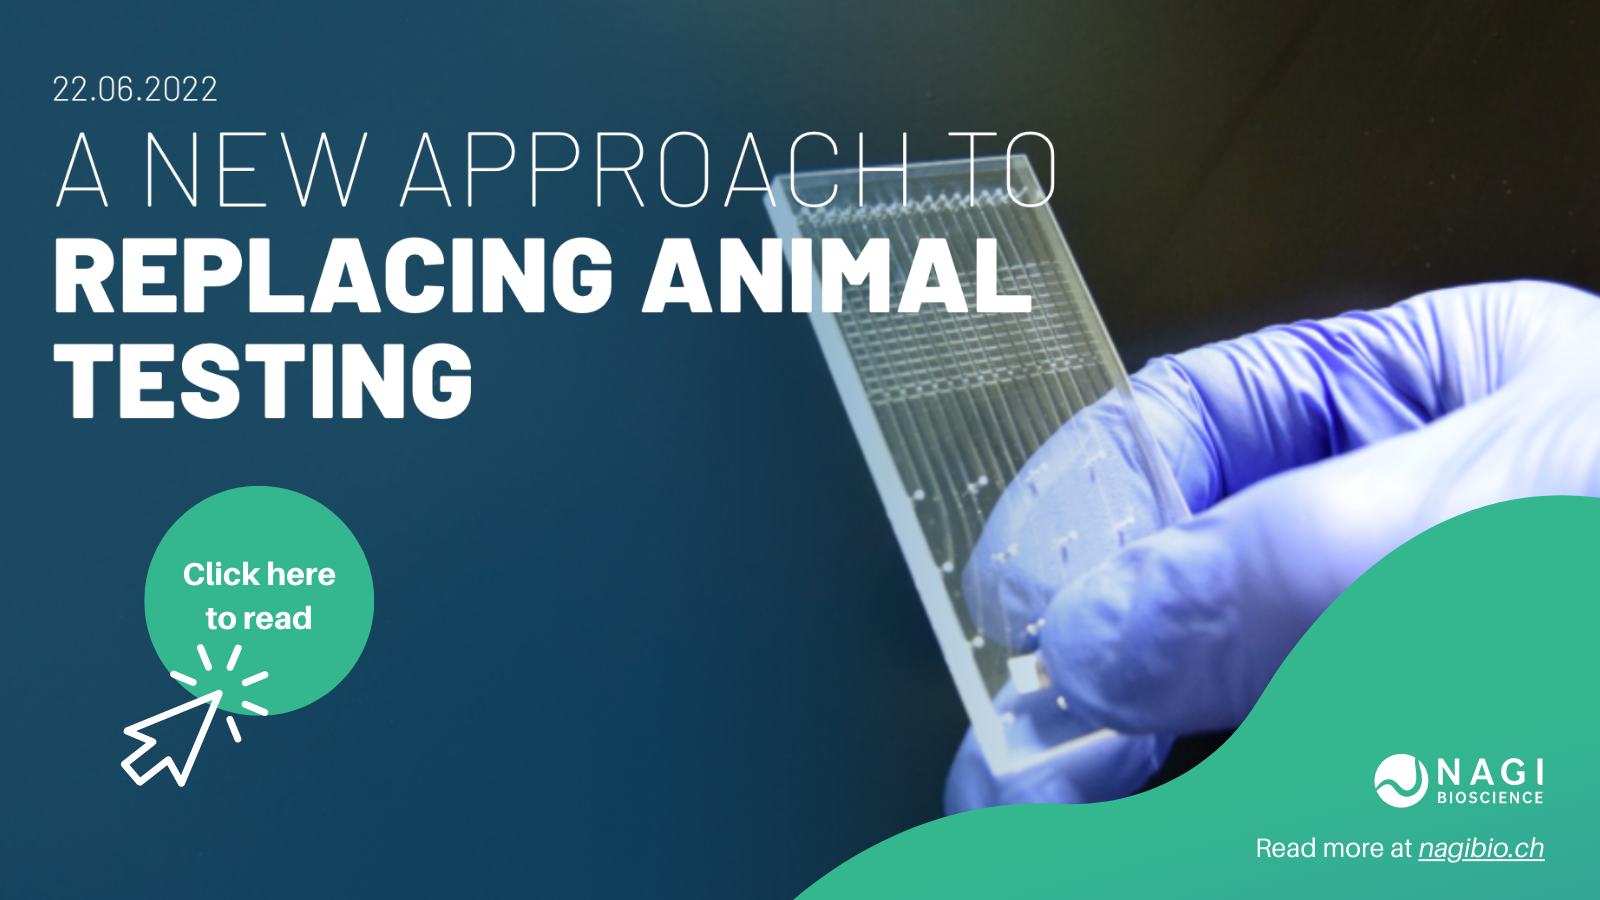 A new approach to replace animal testing